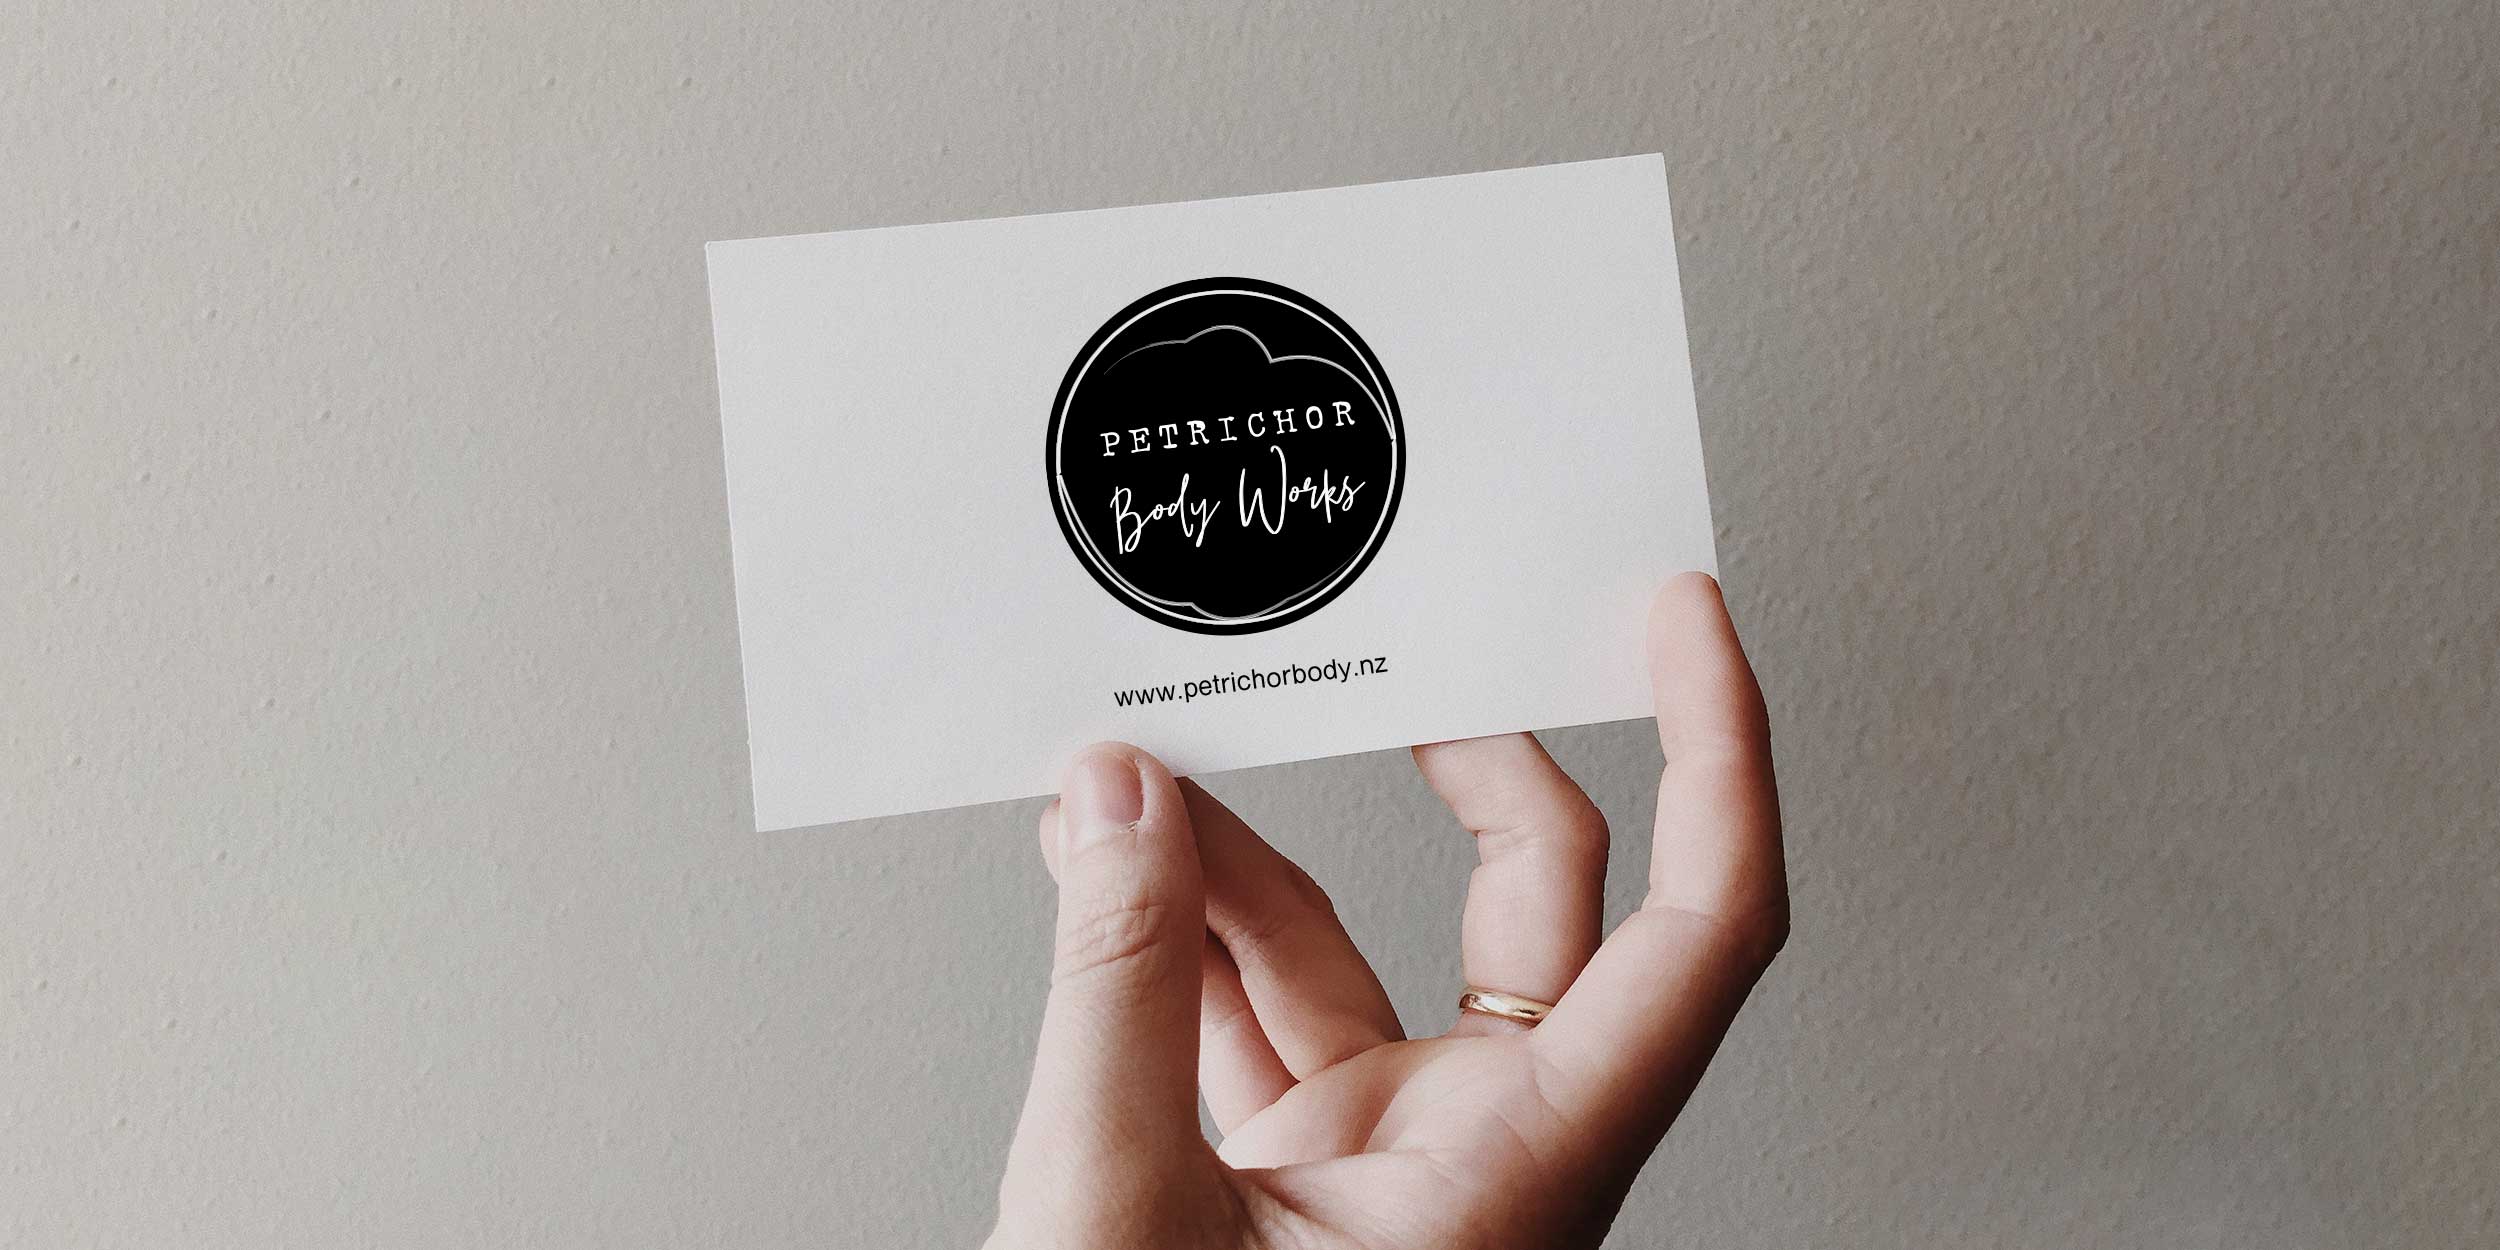 Petrichor Body Works Business Card Graphic Design